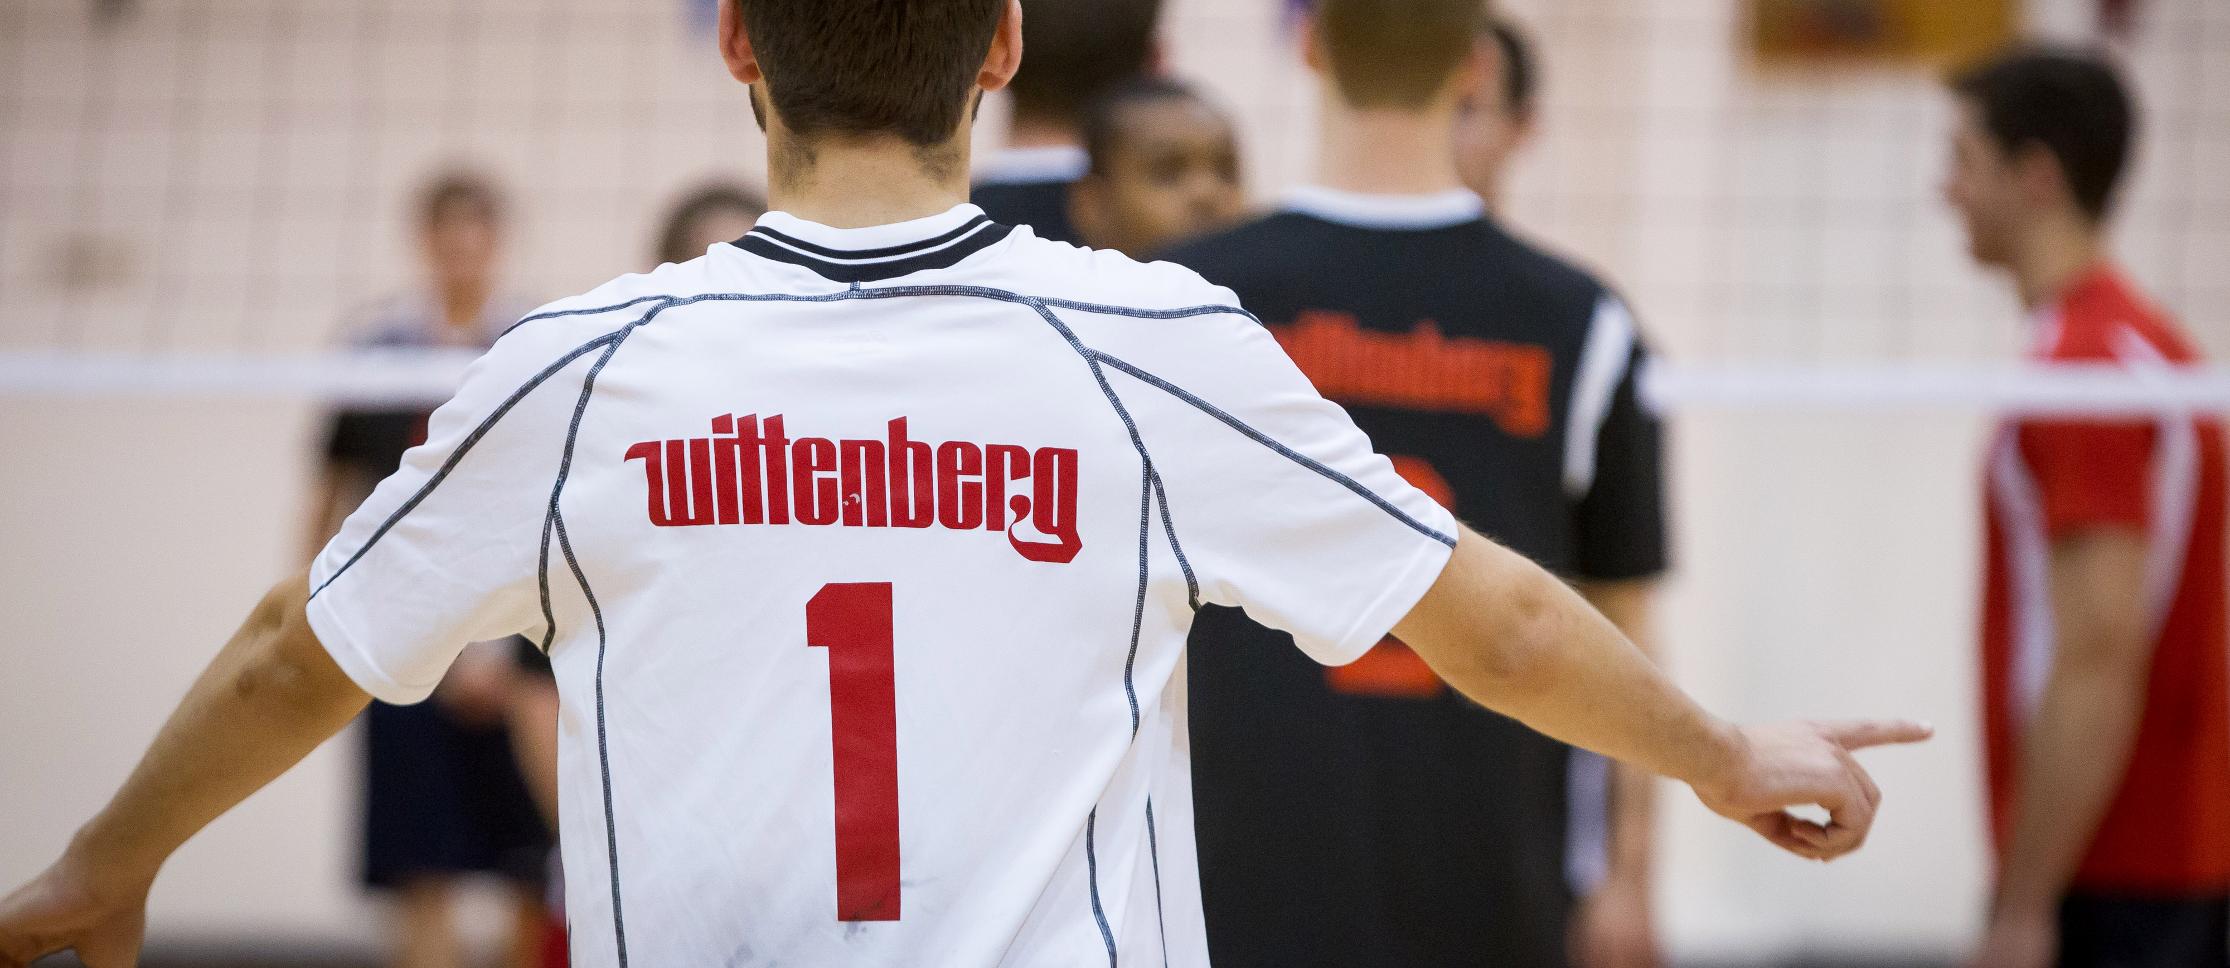 In a night of firsts, the inaugural season for men's volleyball got off on a winning foot. File Photo|Nick Falzerano